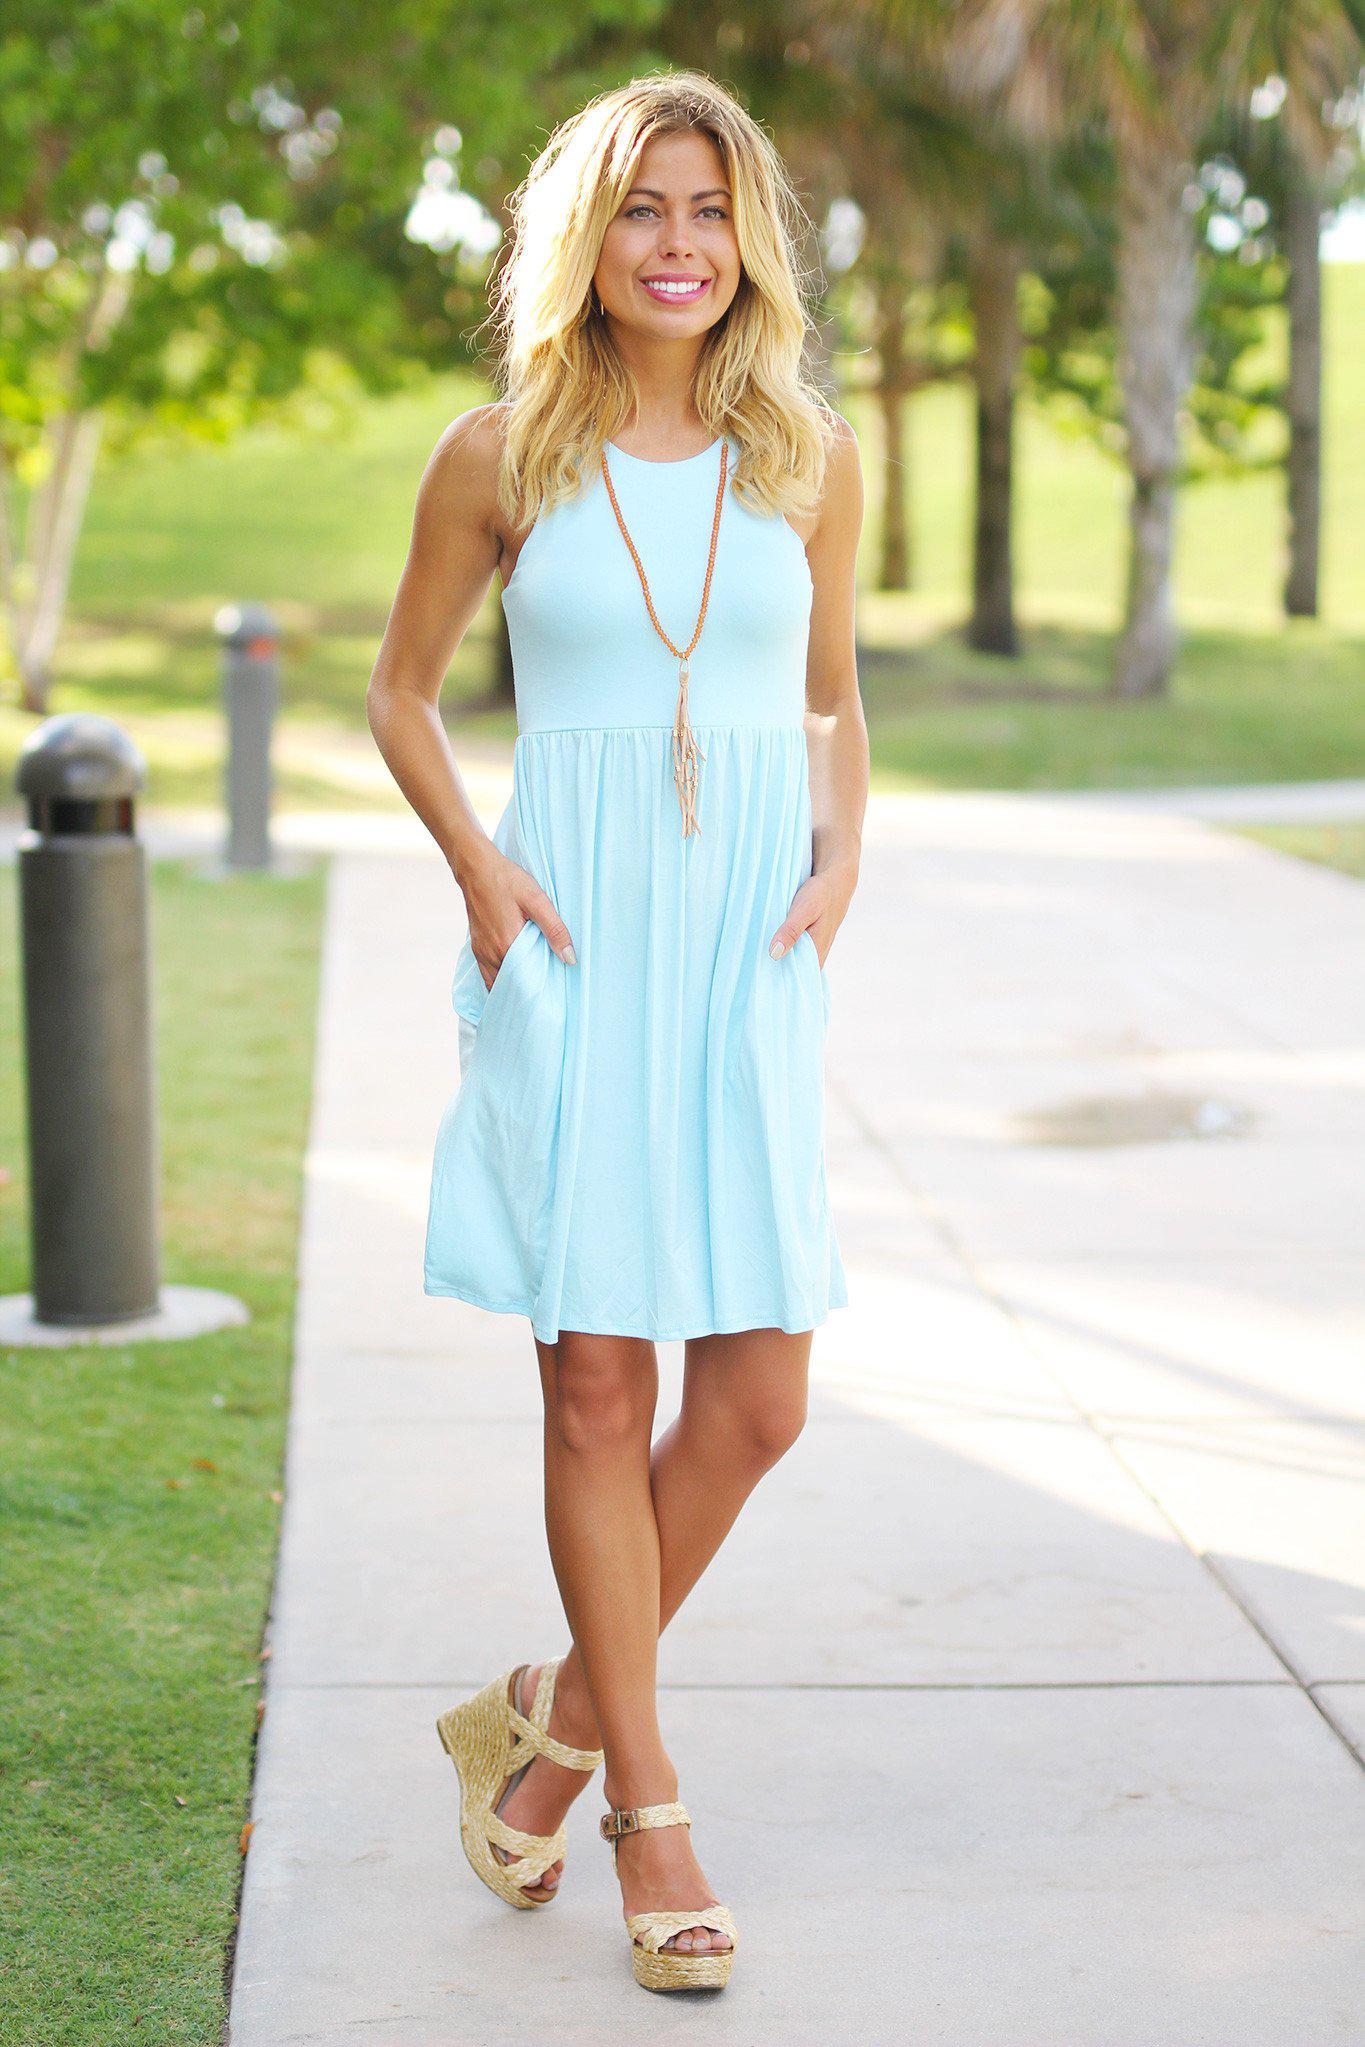 Baby Blue Short Dress with Pockets | Baby Blue Summer Dress – Saved by